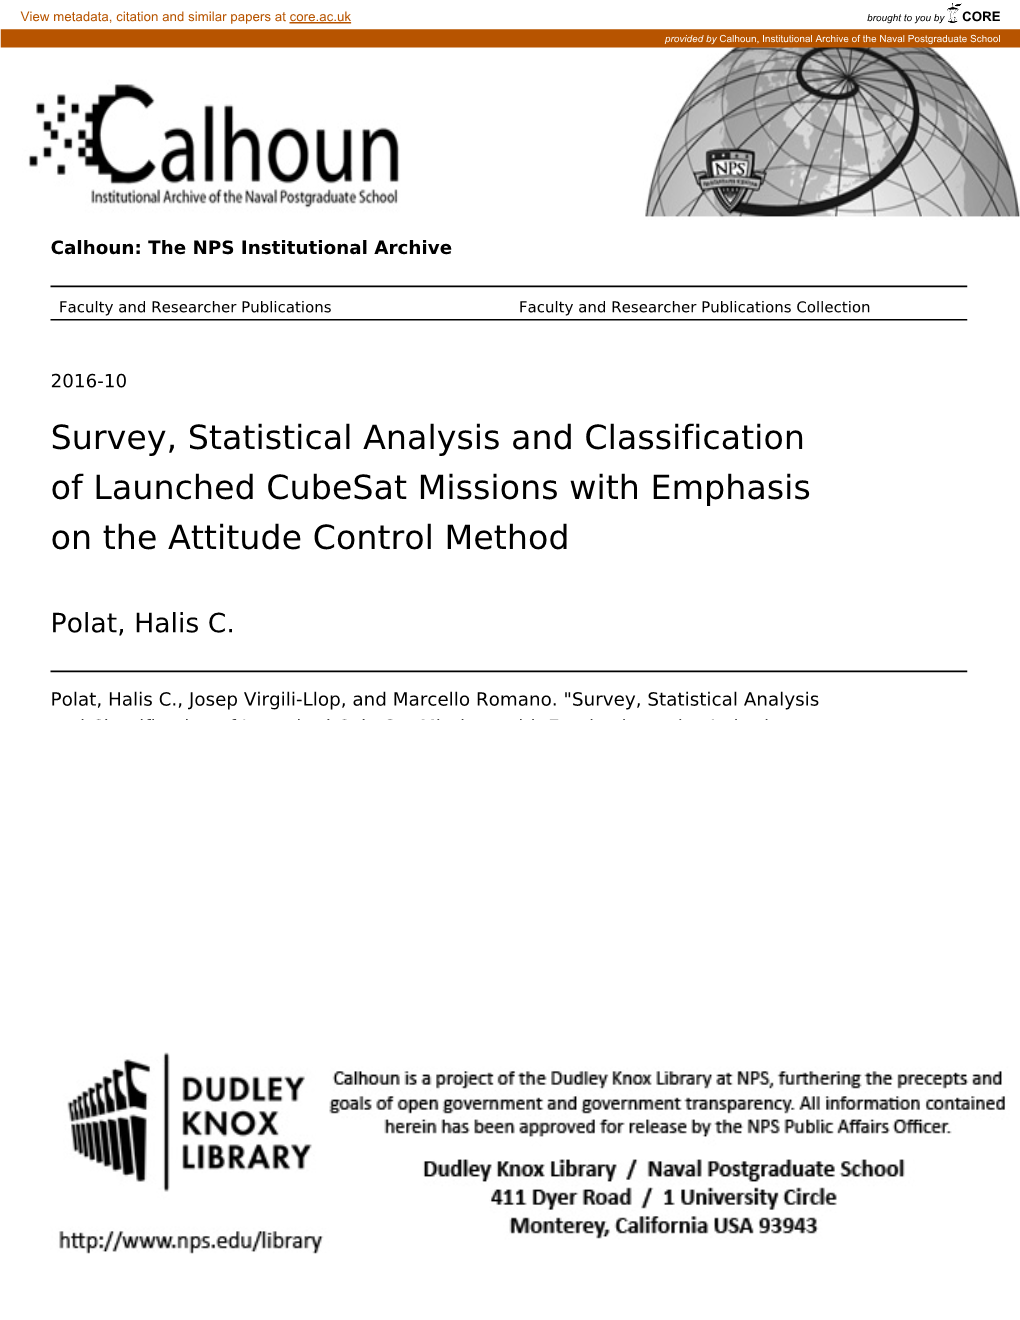 Survey, Statistical Analysis and Classification of Launched Cubesat Missions with Emphasis on the Attitude Control Method